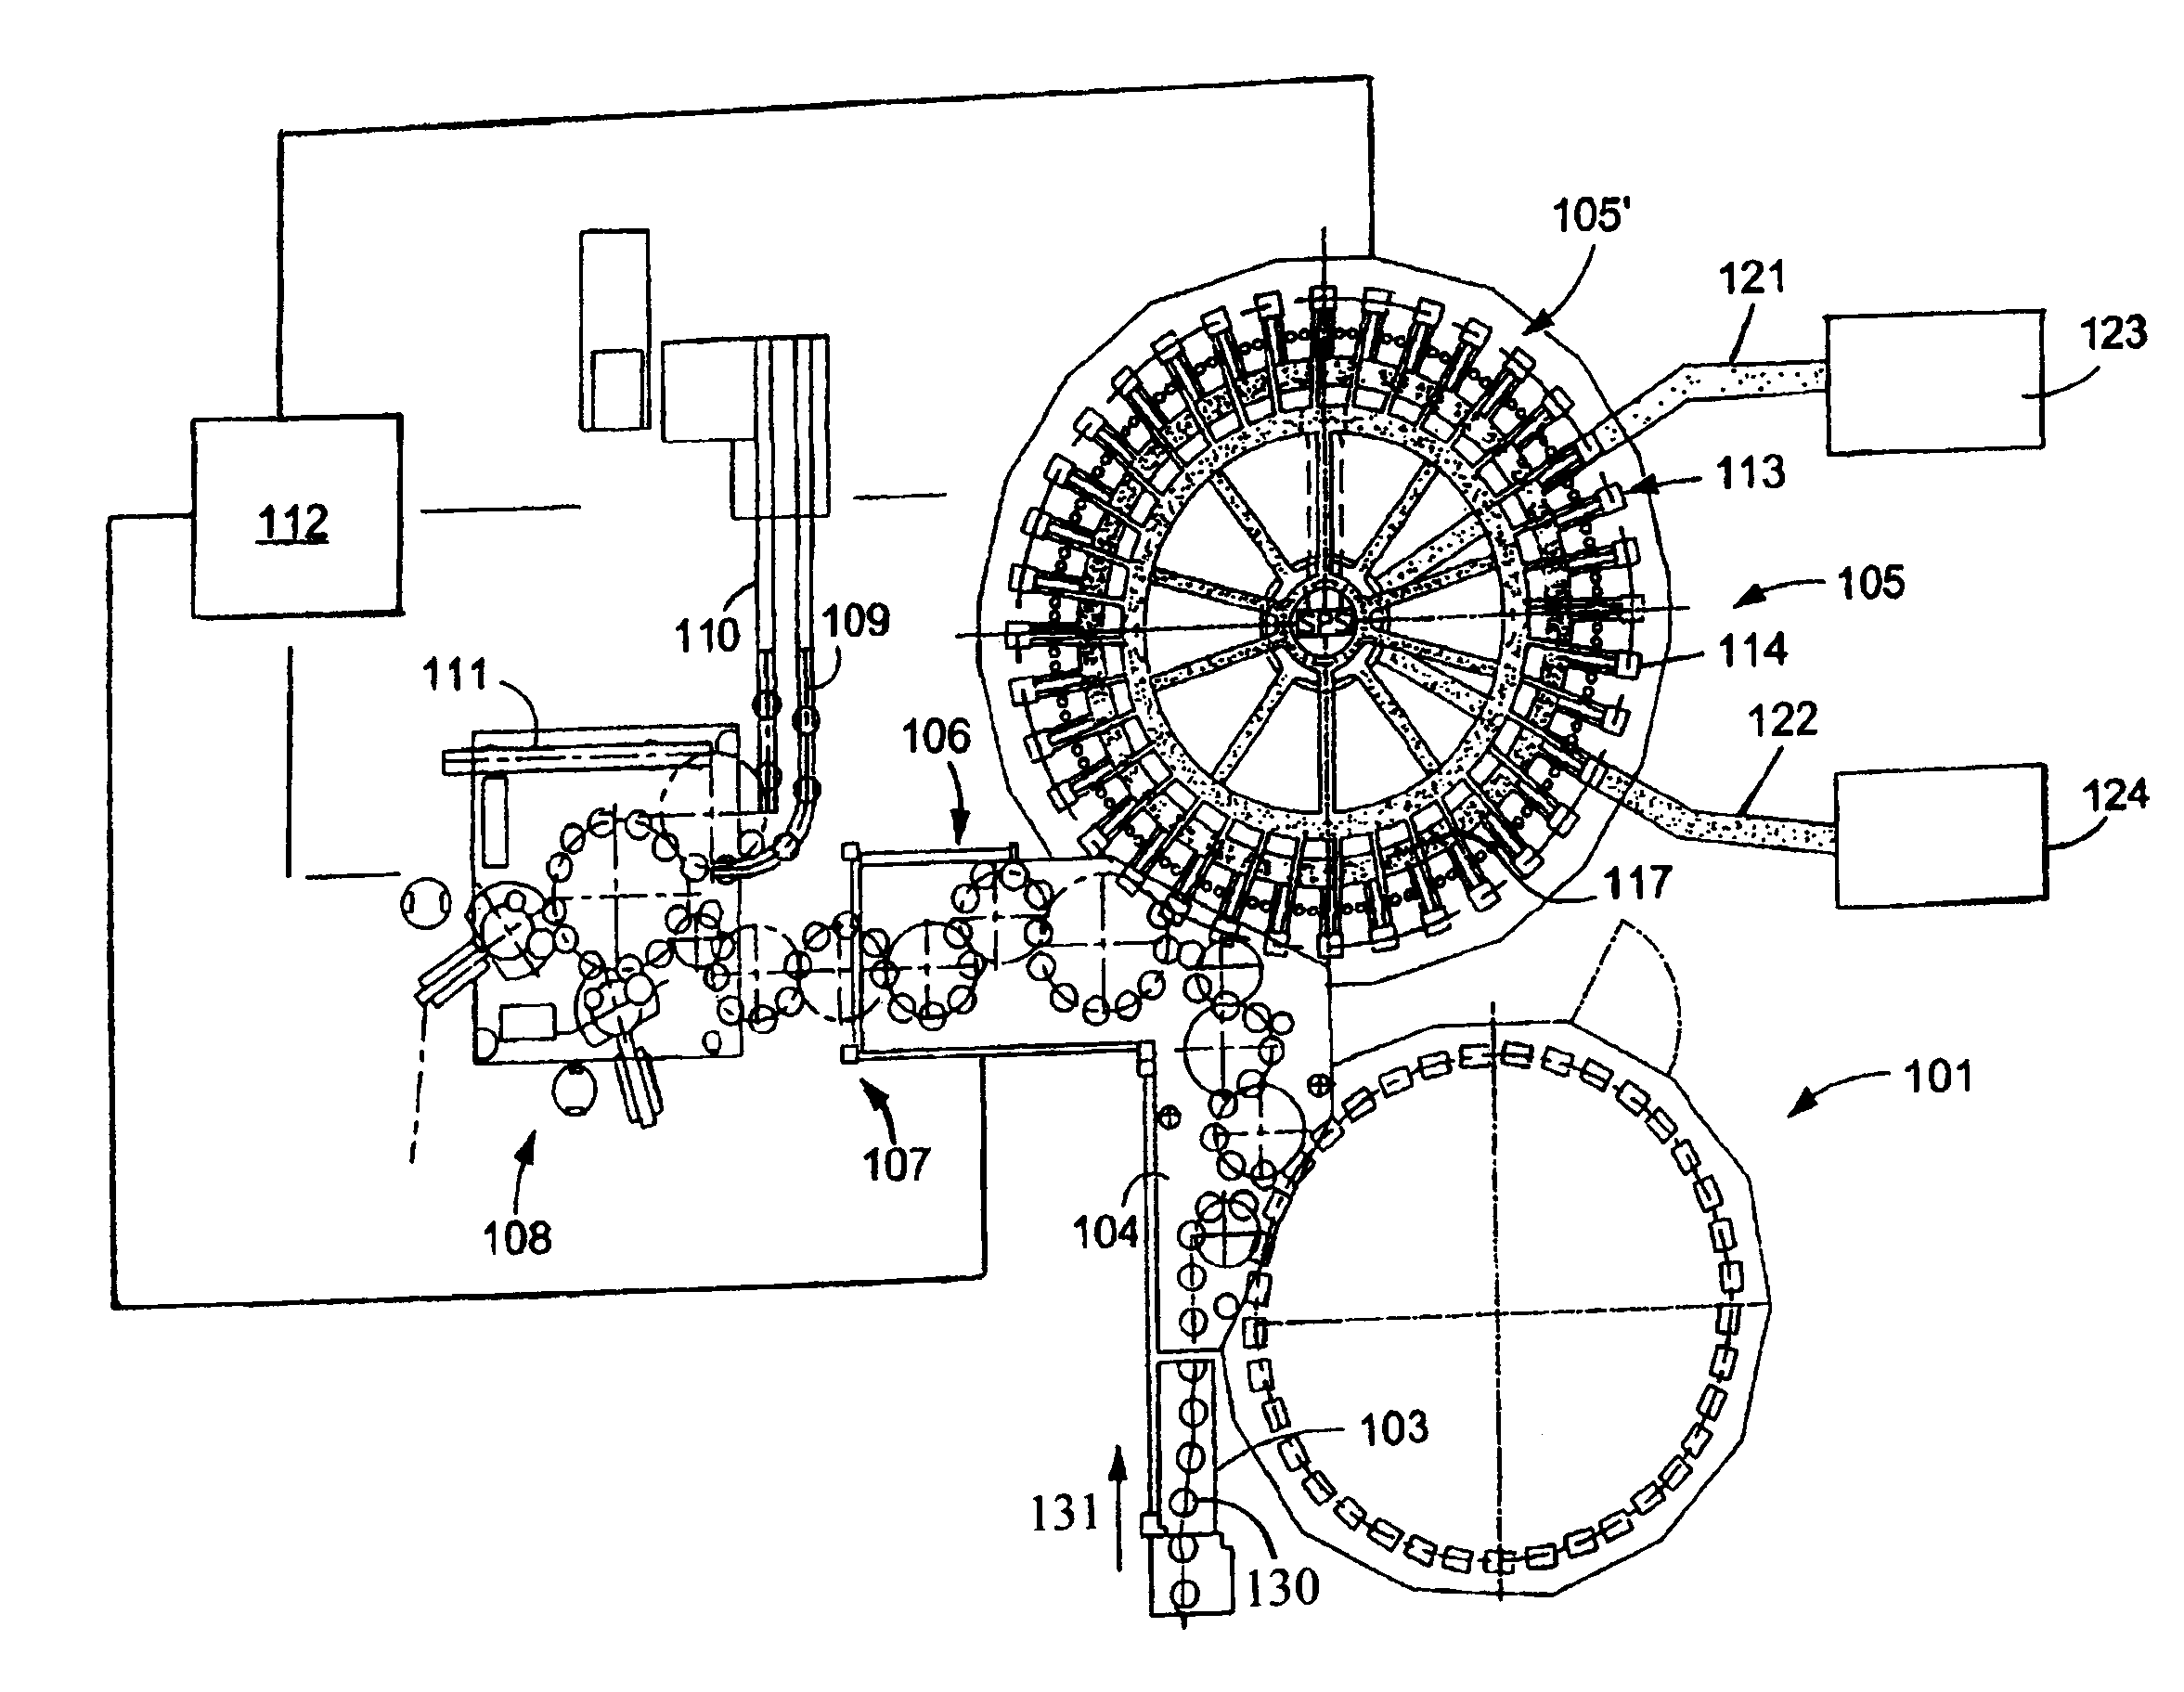 Bottling or container filling machine and other rotary bottle or container handling machines in a bottling or container filling plant and a drive therefor